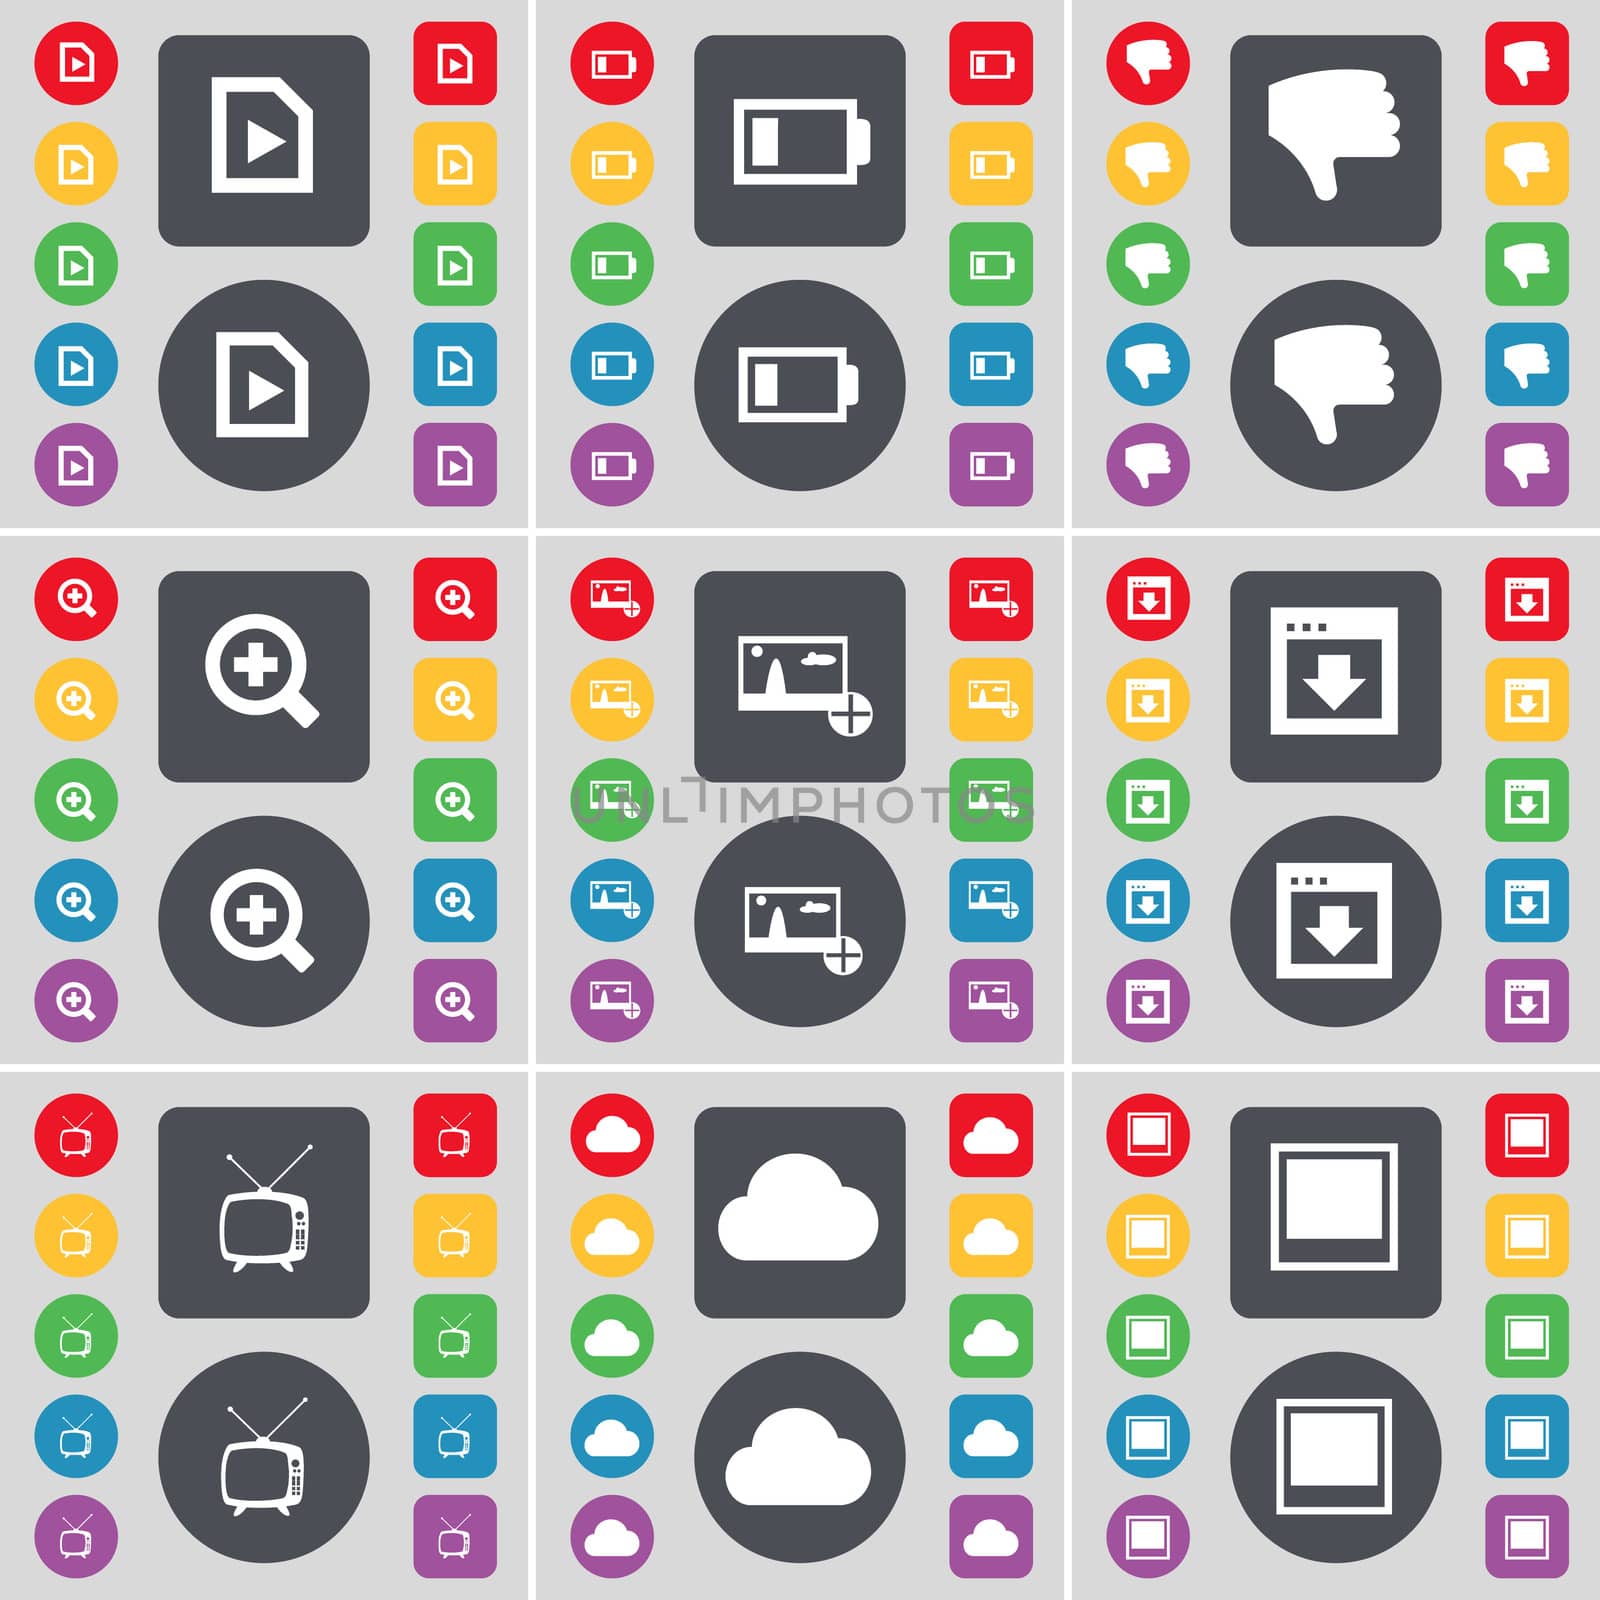 Media file, Battery, Dislike, Magnifying glass, Picture, Window, Retro TV, Cloud icon symbol. A large set of flat, colored buttons for your design. illustration